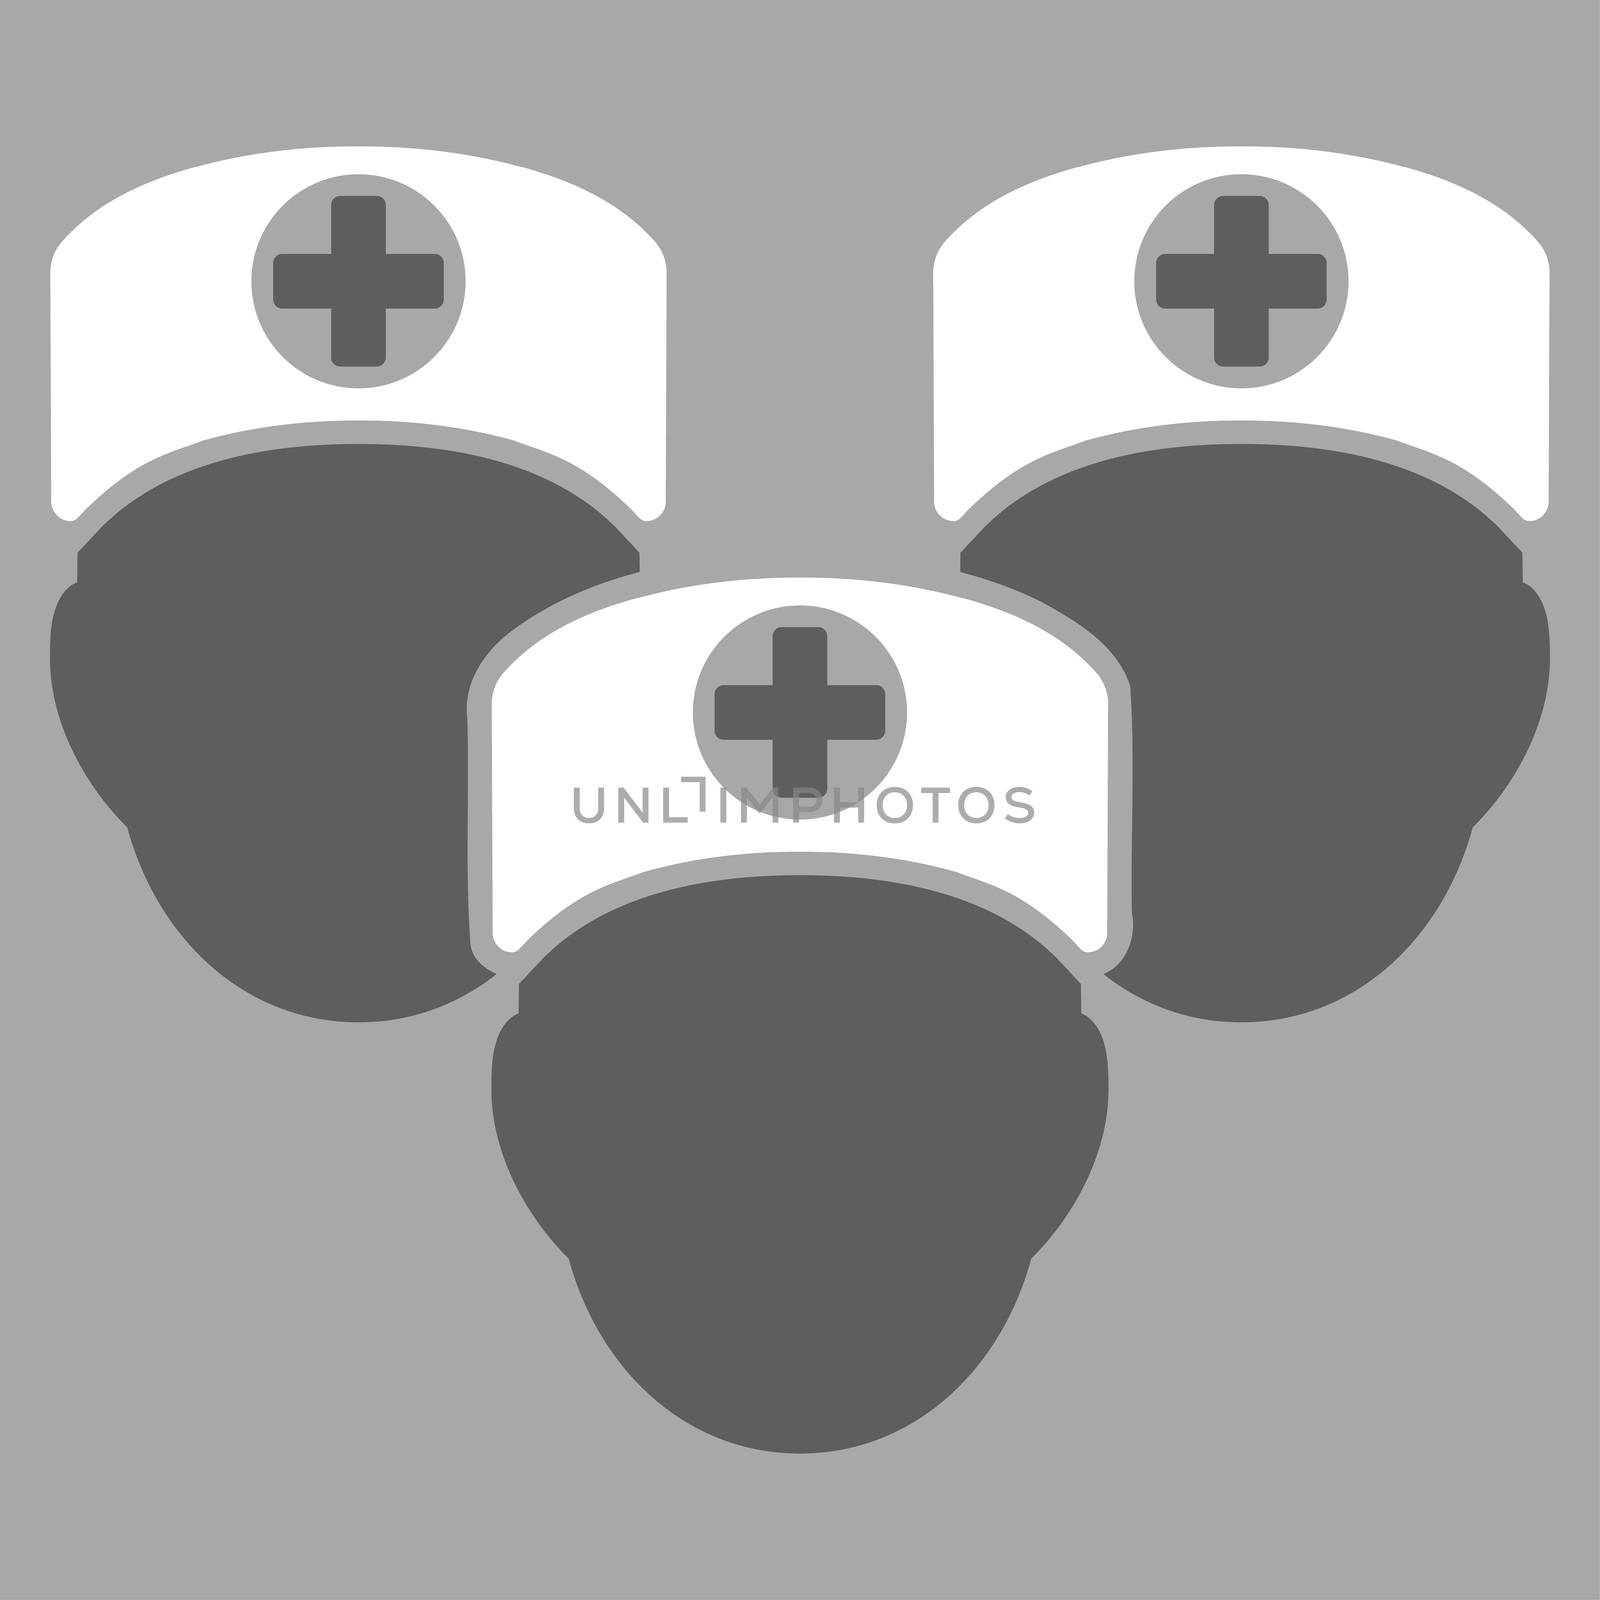 Medical Staff raster icon. Style is bicolor flat symbol, dark gray and white colors, rounded angles, silver background.